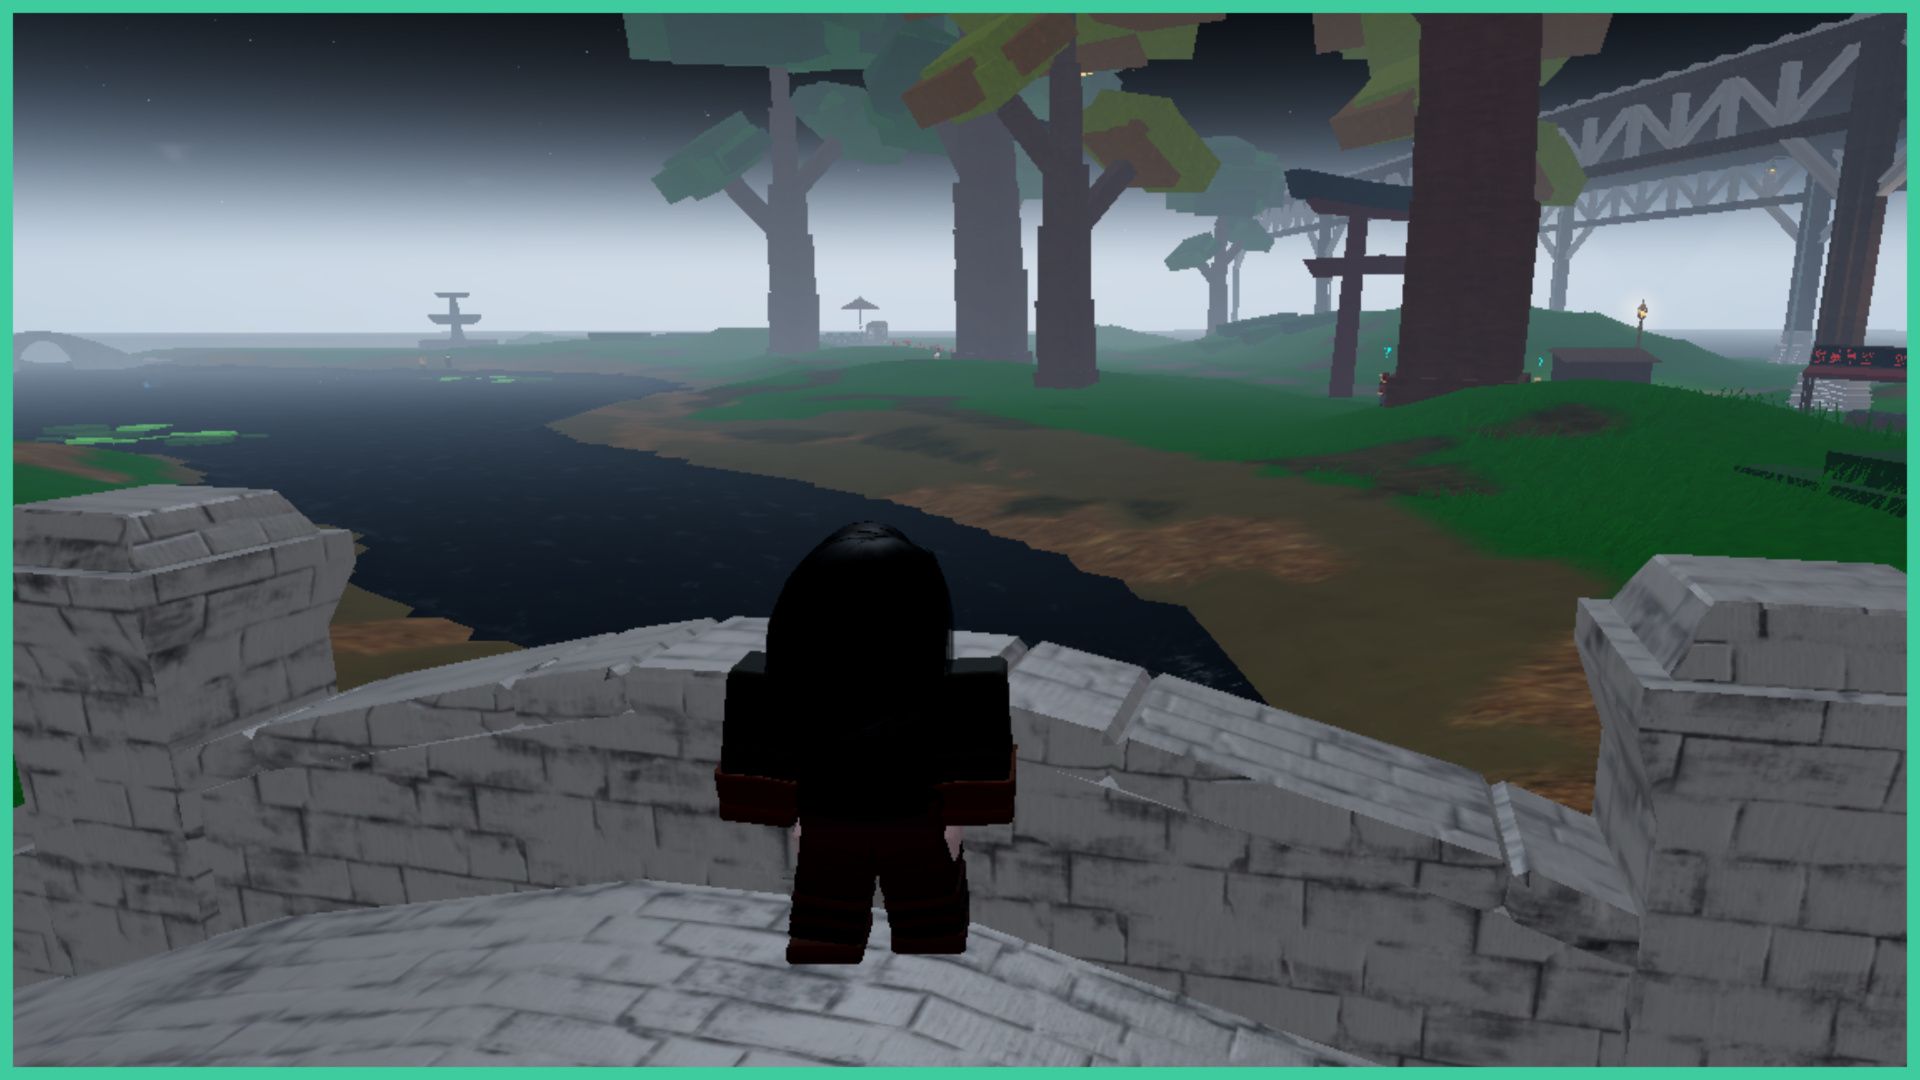 feature image for our robending codes, the image features a screenshot from the main hub of the game as a player stands on a stone bridge whilst overlooking the river, surrounded by tall trees and a large structure in the distance, the area is coated in mist